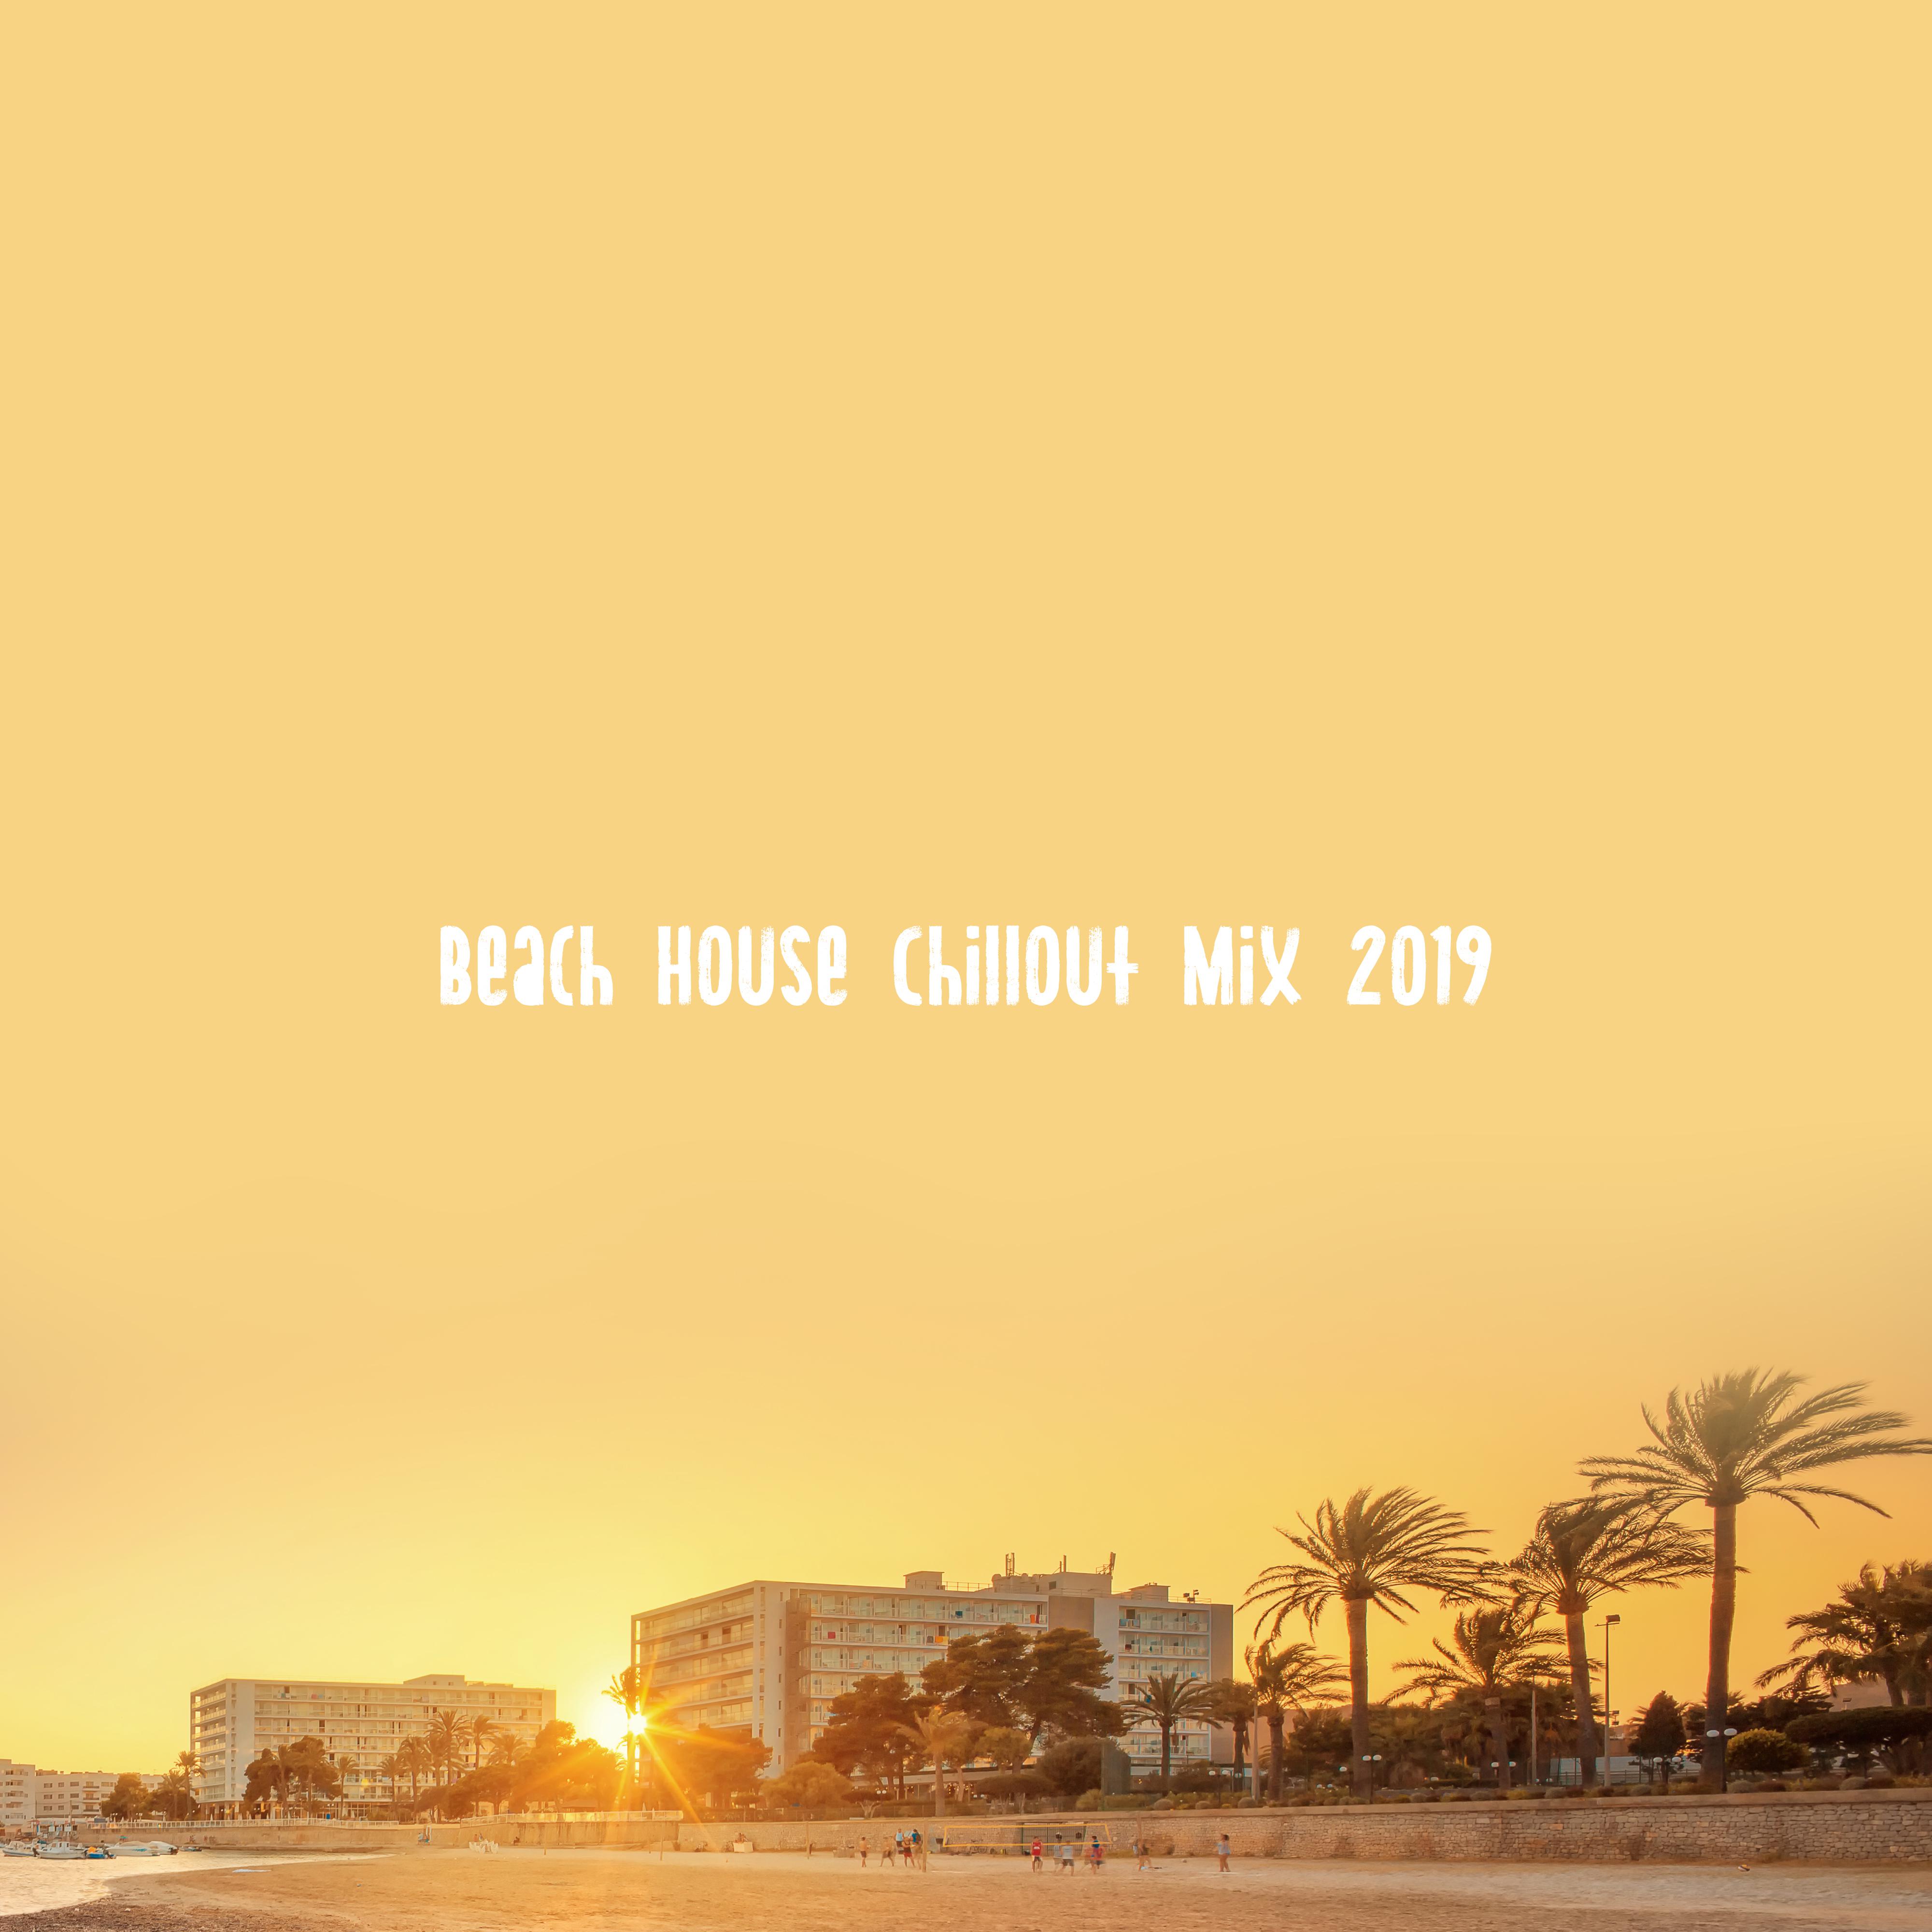 Beach House Chillout Mix 2019: Slow Electronic Beats Selection for Total Summer Relax Experience, Most Calming Music, Full Vacation Rest on the Beach